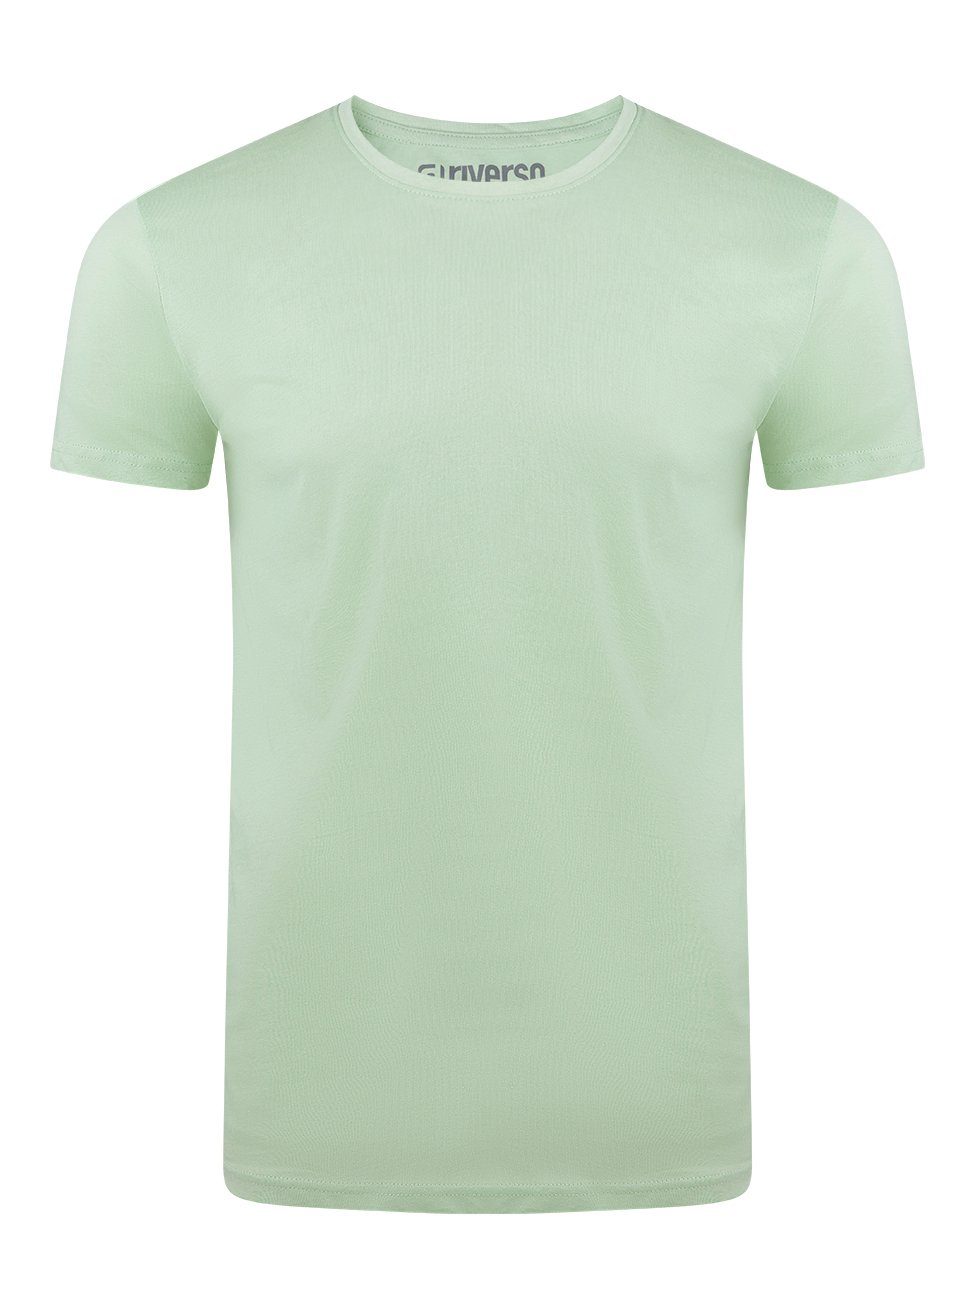 T-Shirt Baumwolle aus Green (1-tlg) Middle (12300) riverso O-Neck 100% RIVAaron